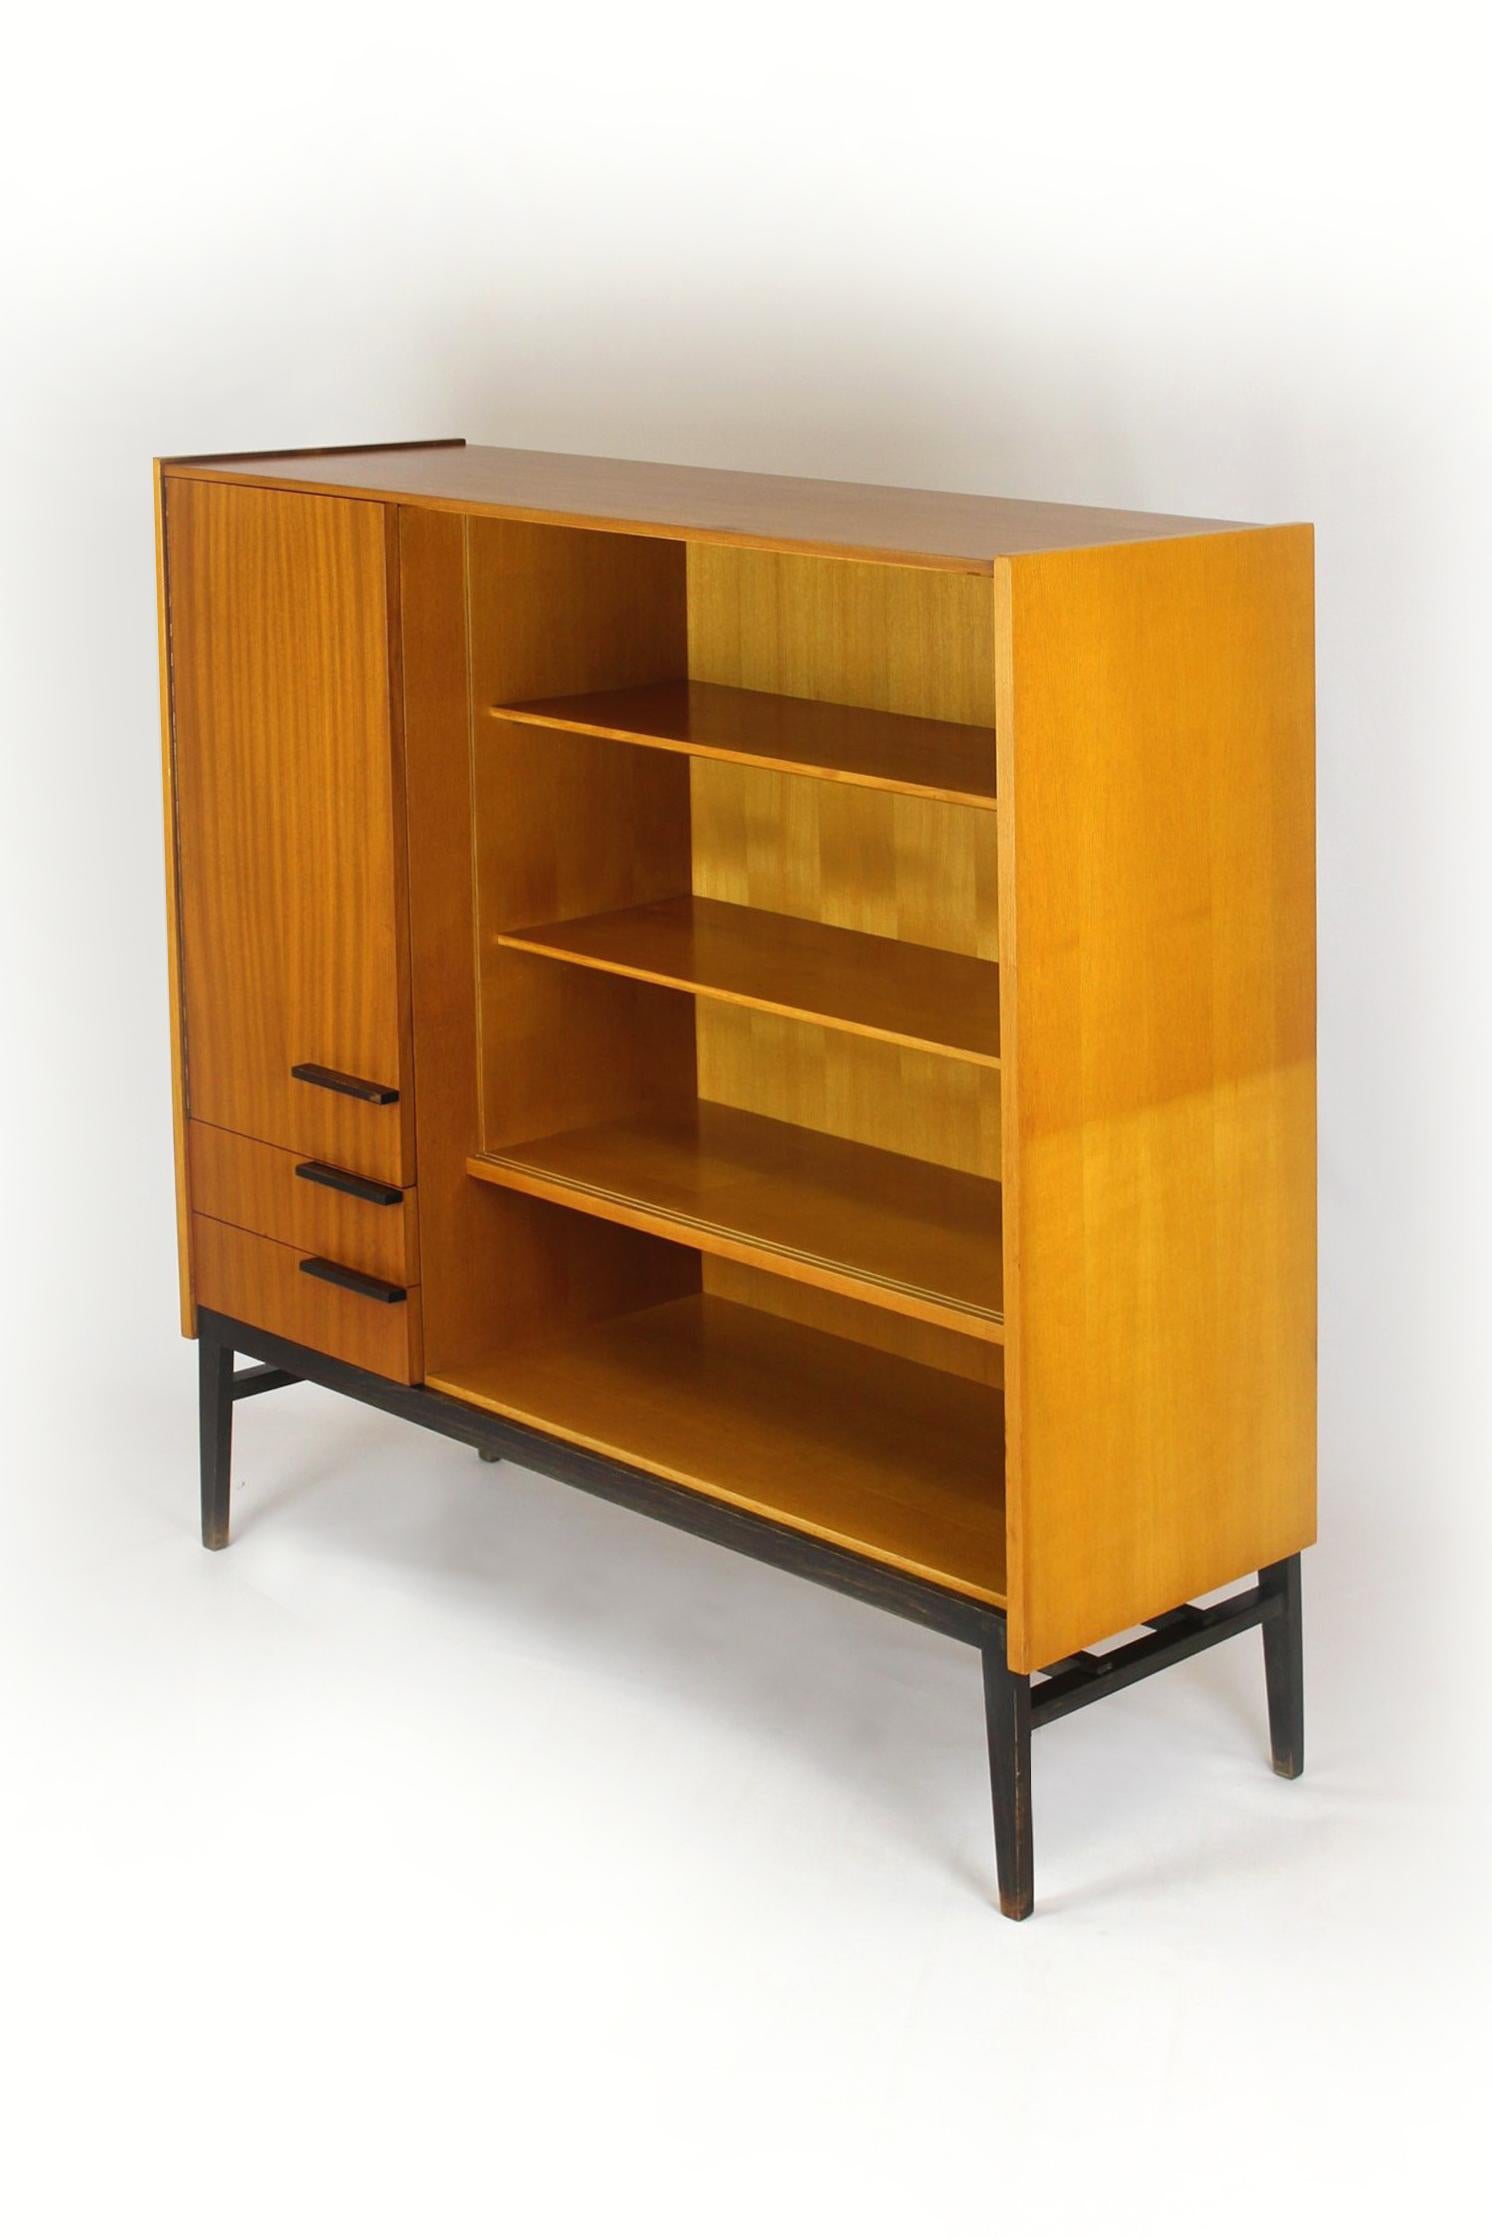 Midcentury Bookcase from Up Zavody, 1970 For Sale 7